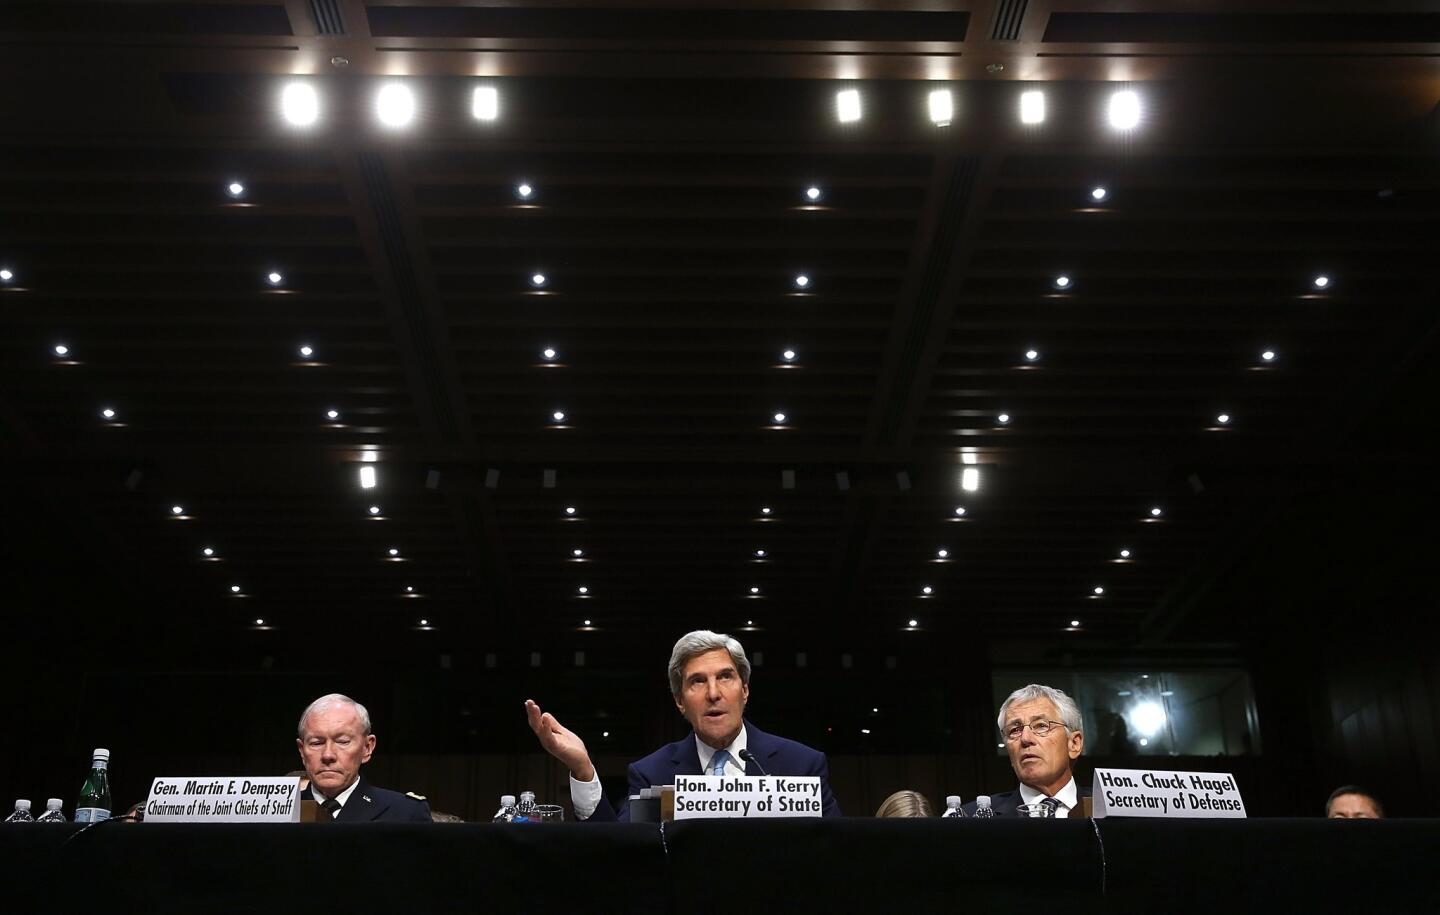 Dempsey, Kerry and Hagel